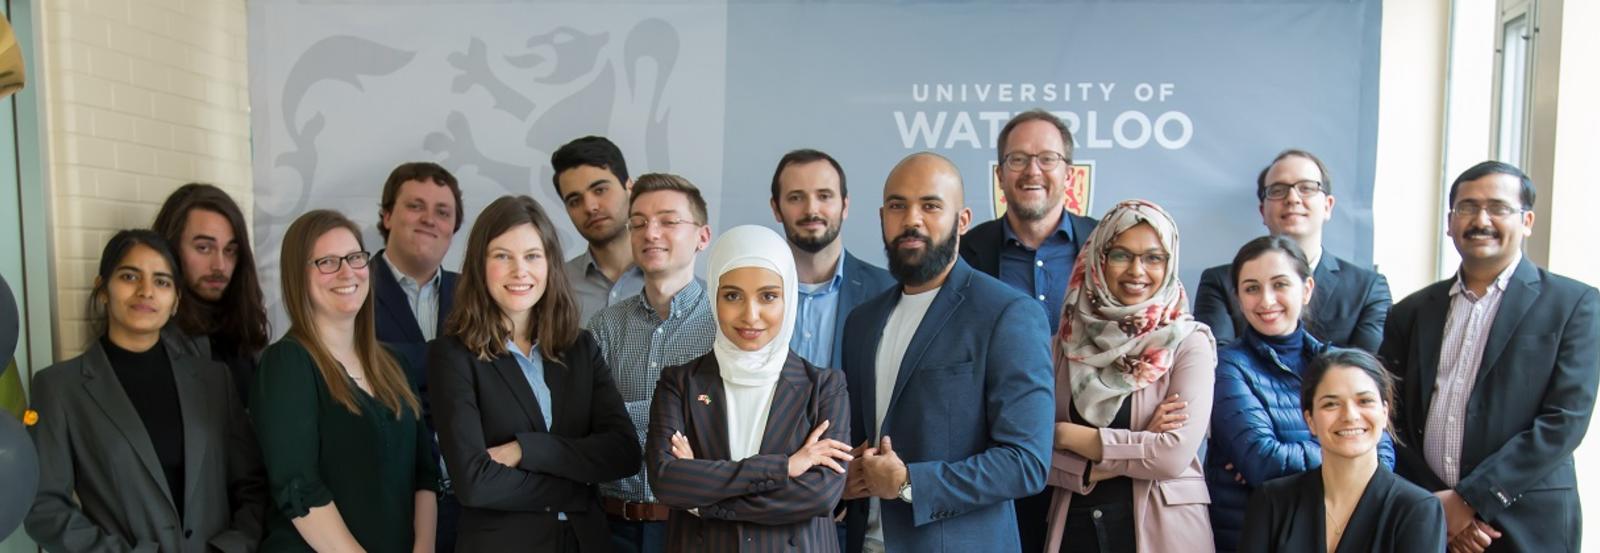 Group photo of all 2020 Waterloo 3MT competitors.